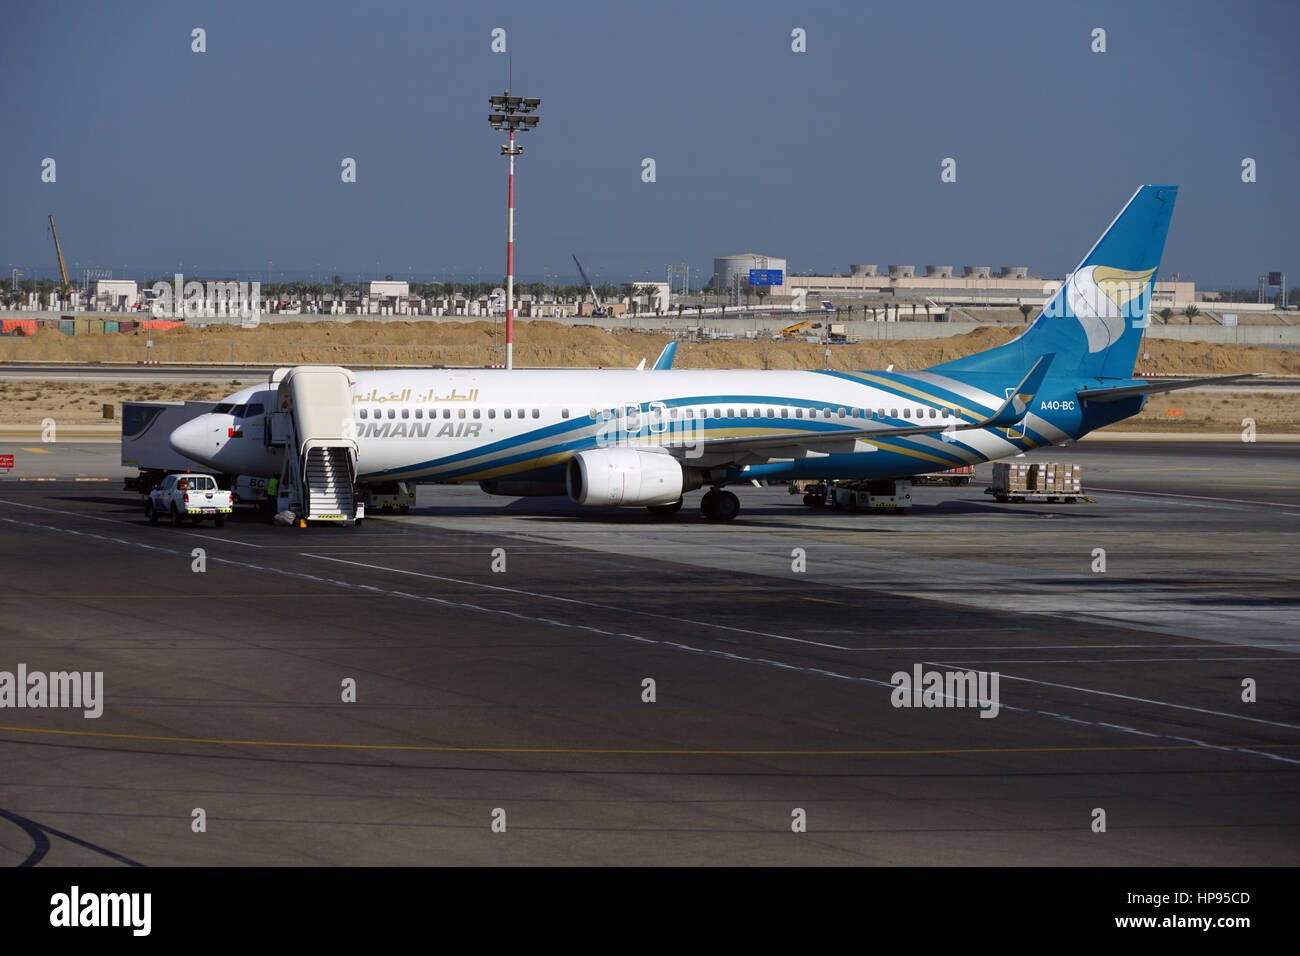 View of the Muscat International Airport (MCT), formerly Seeb International Airport. It is the main airport in Oman and the hub for Oman Air. Stock Photo